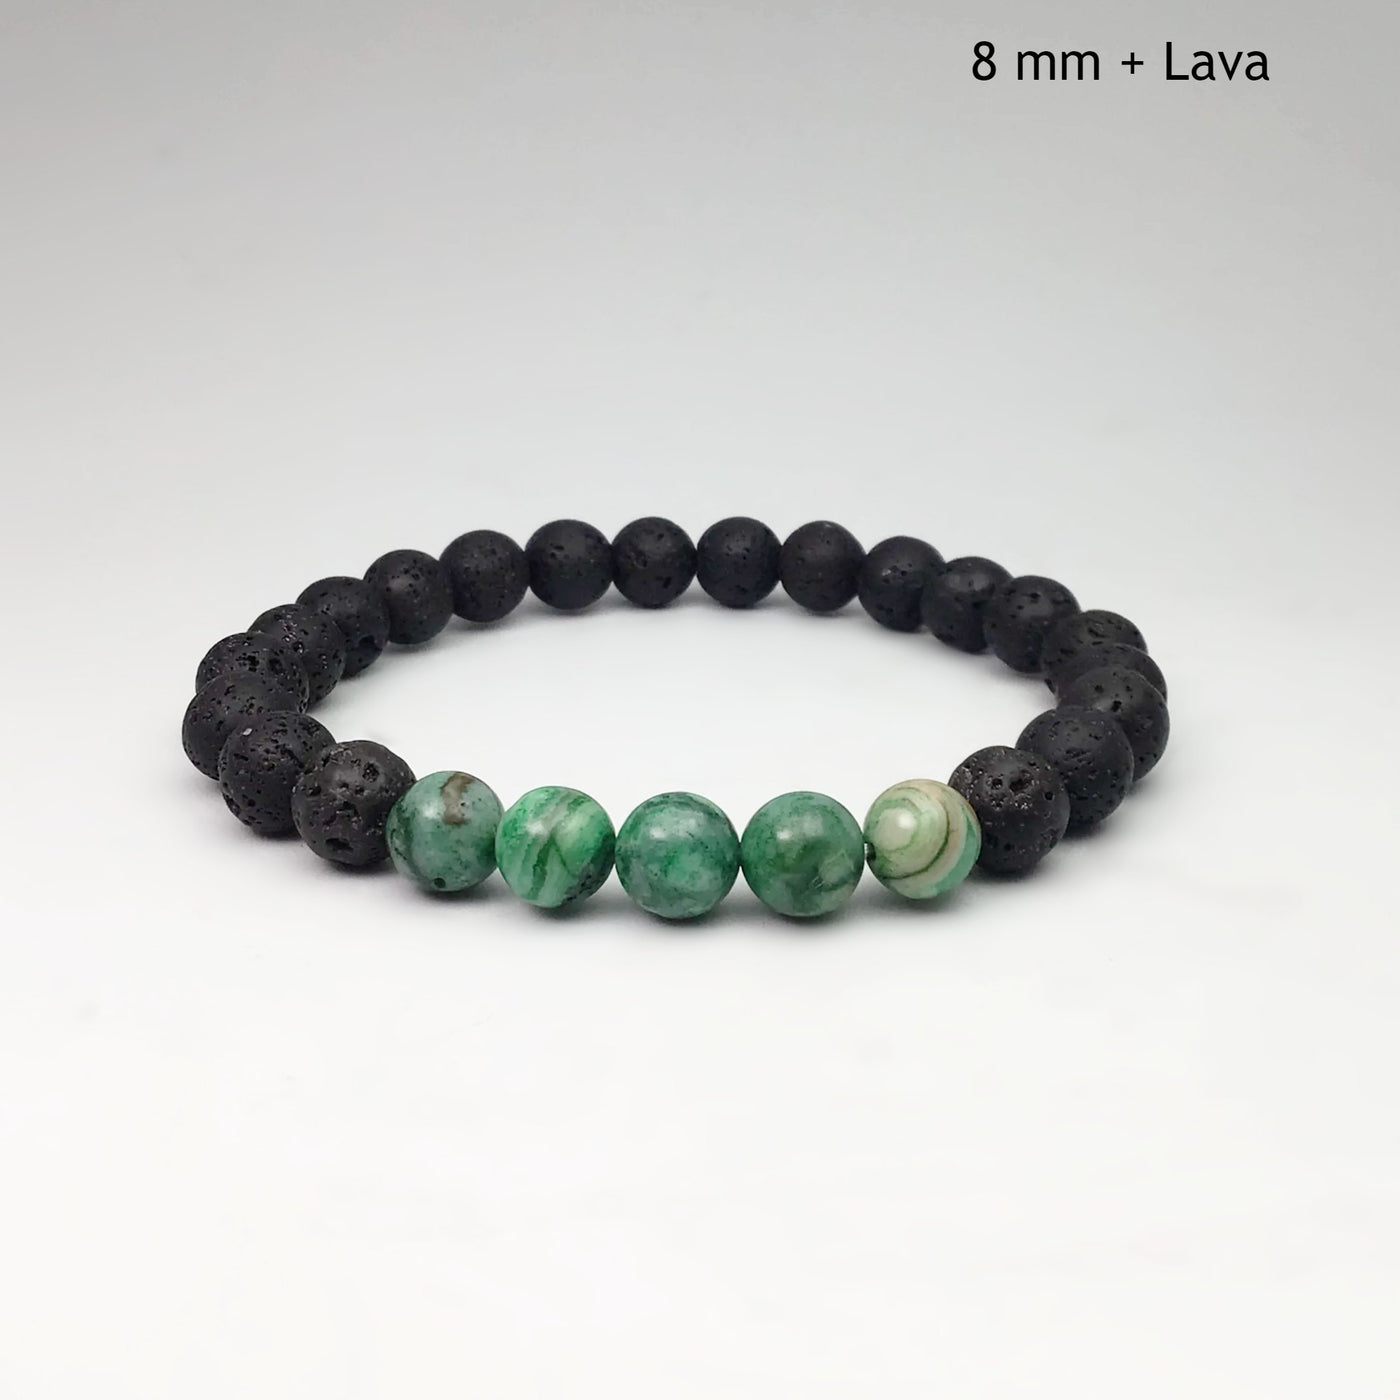 Green Crazy Lace Agate Beaded Bracelet